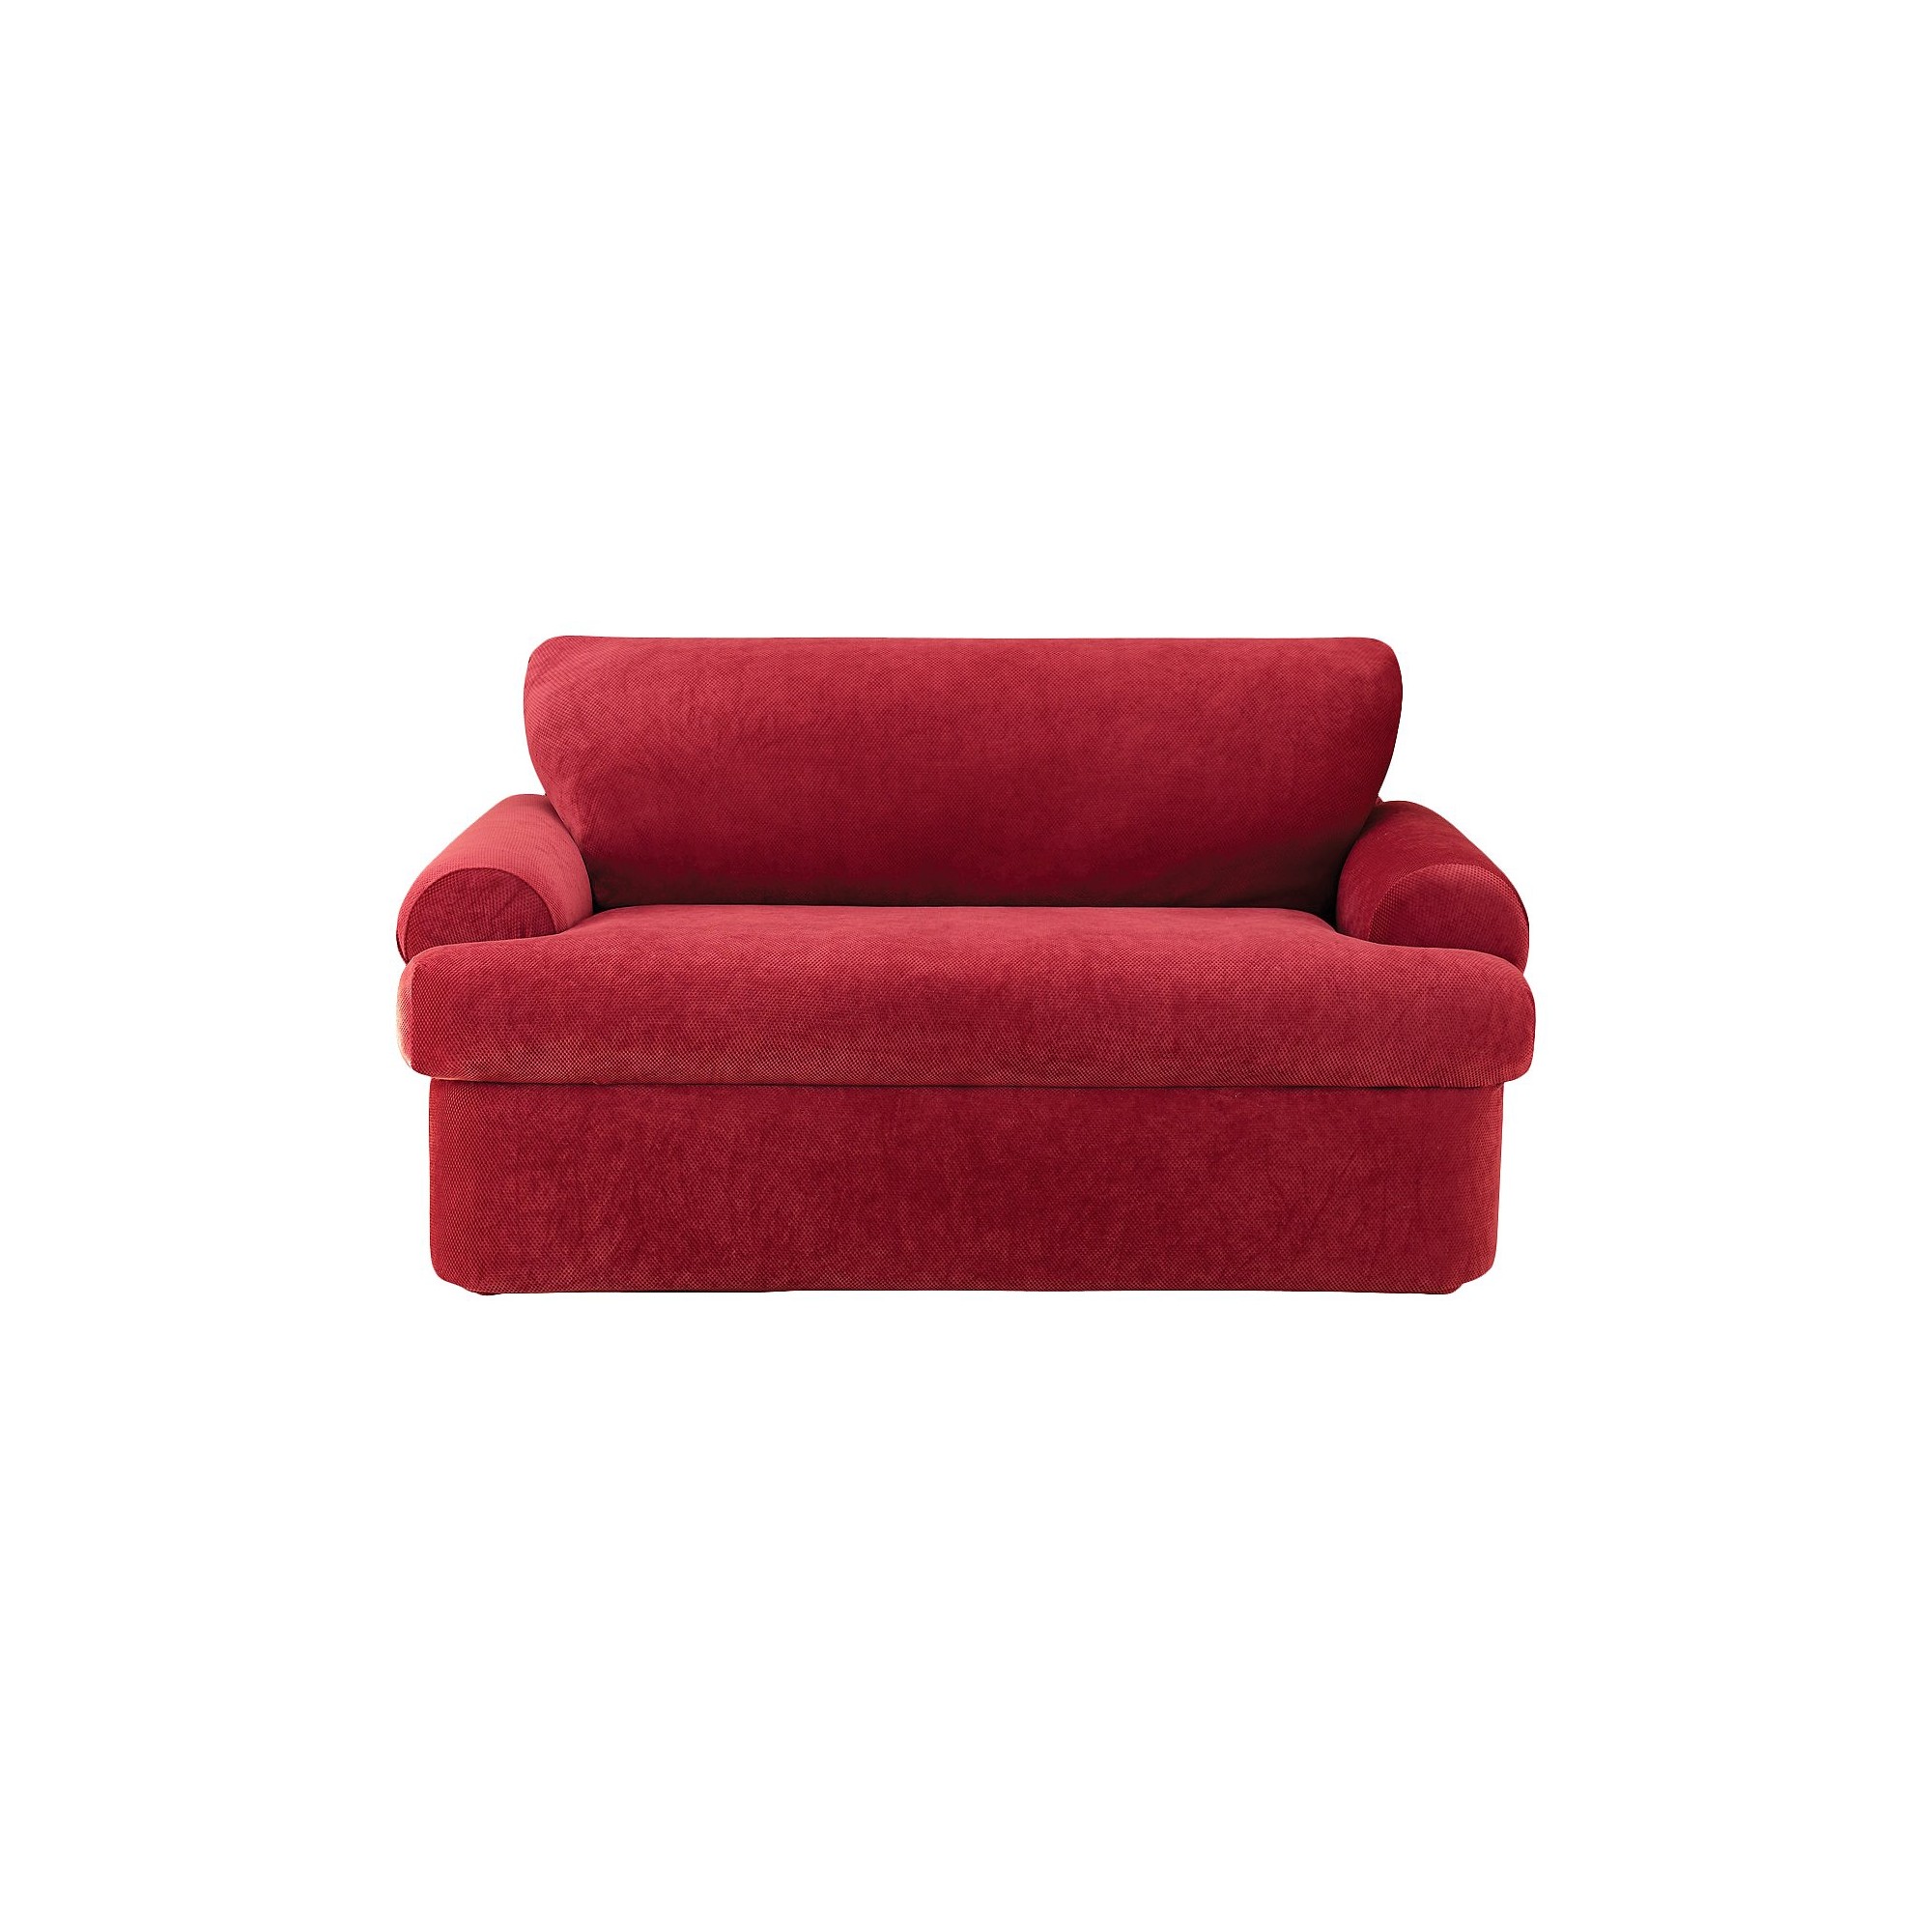 Stretch Pique 3 Piece T Loveseat Slipcover - Sure Fit, Red